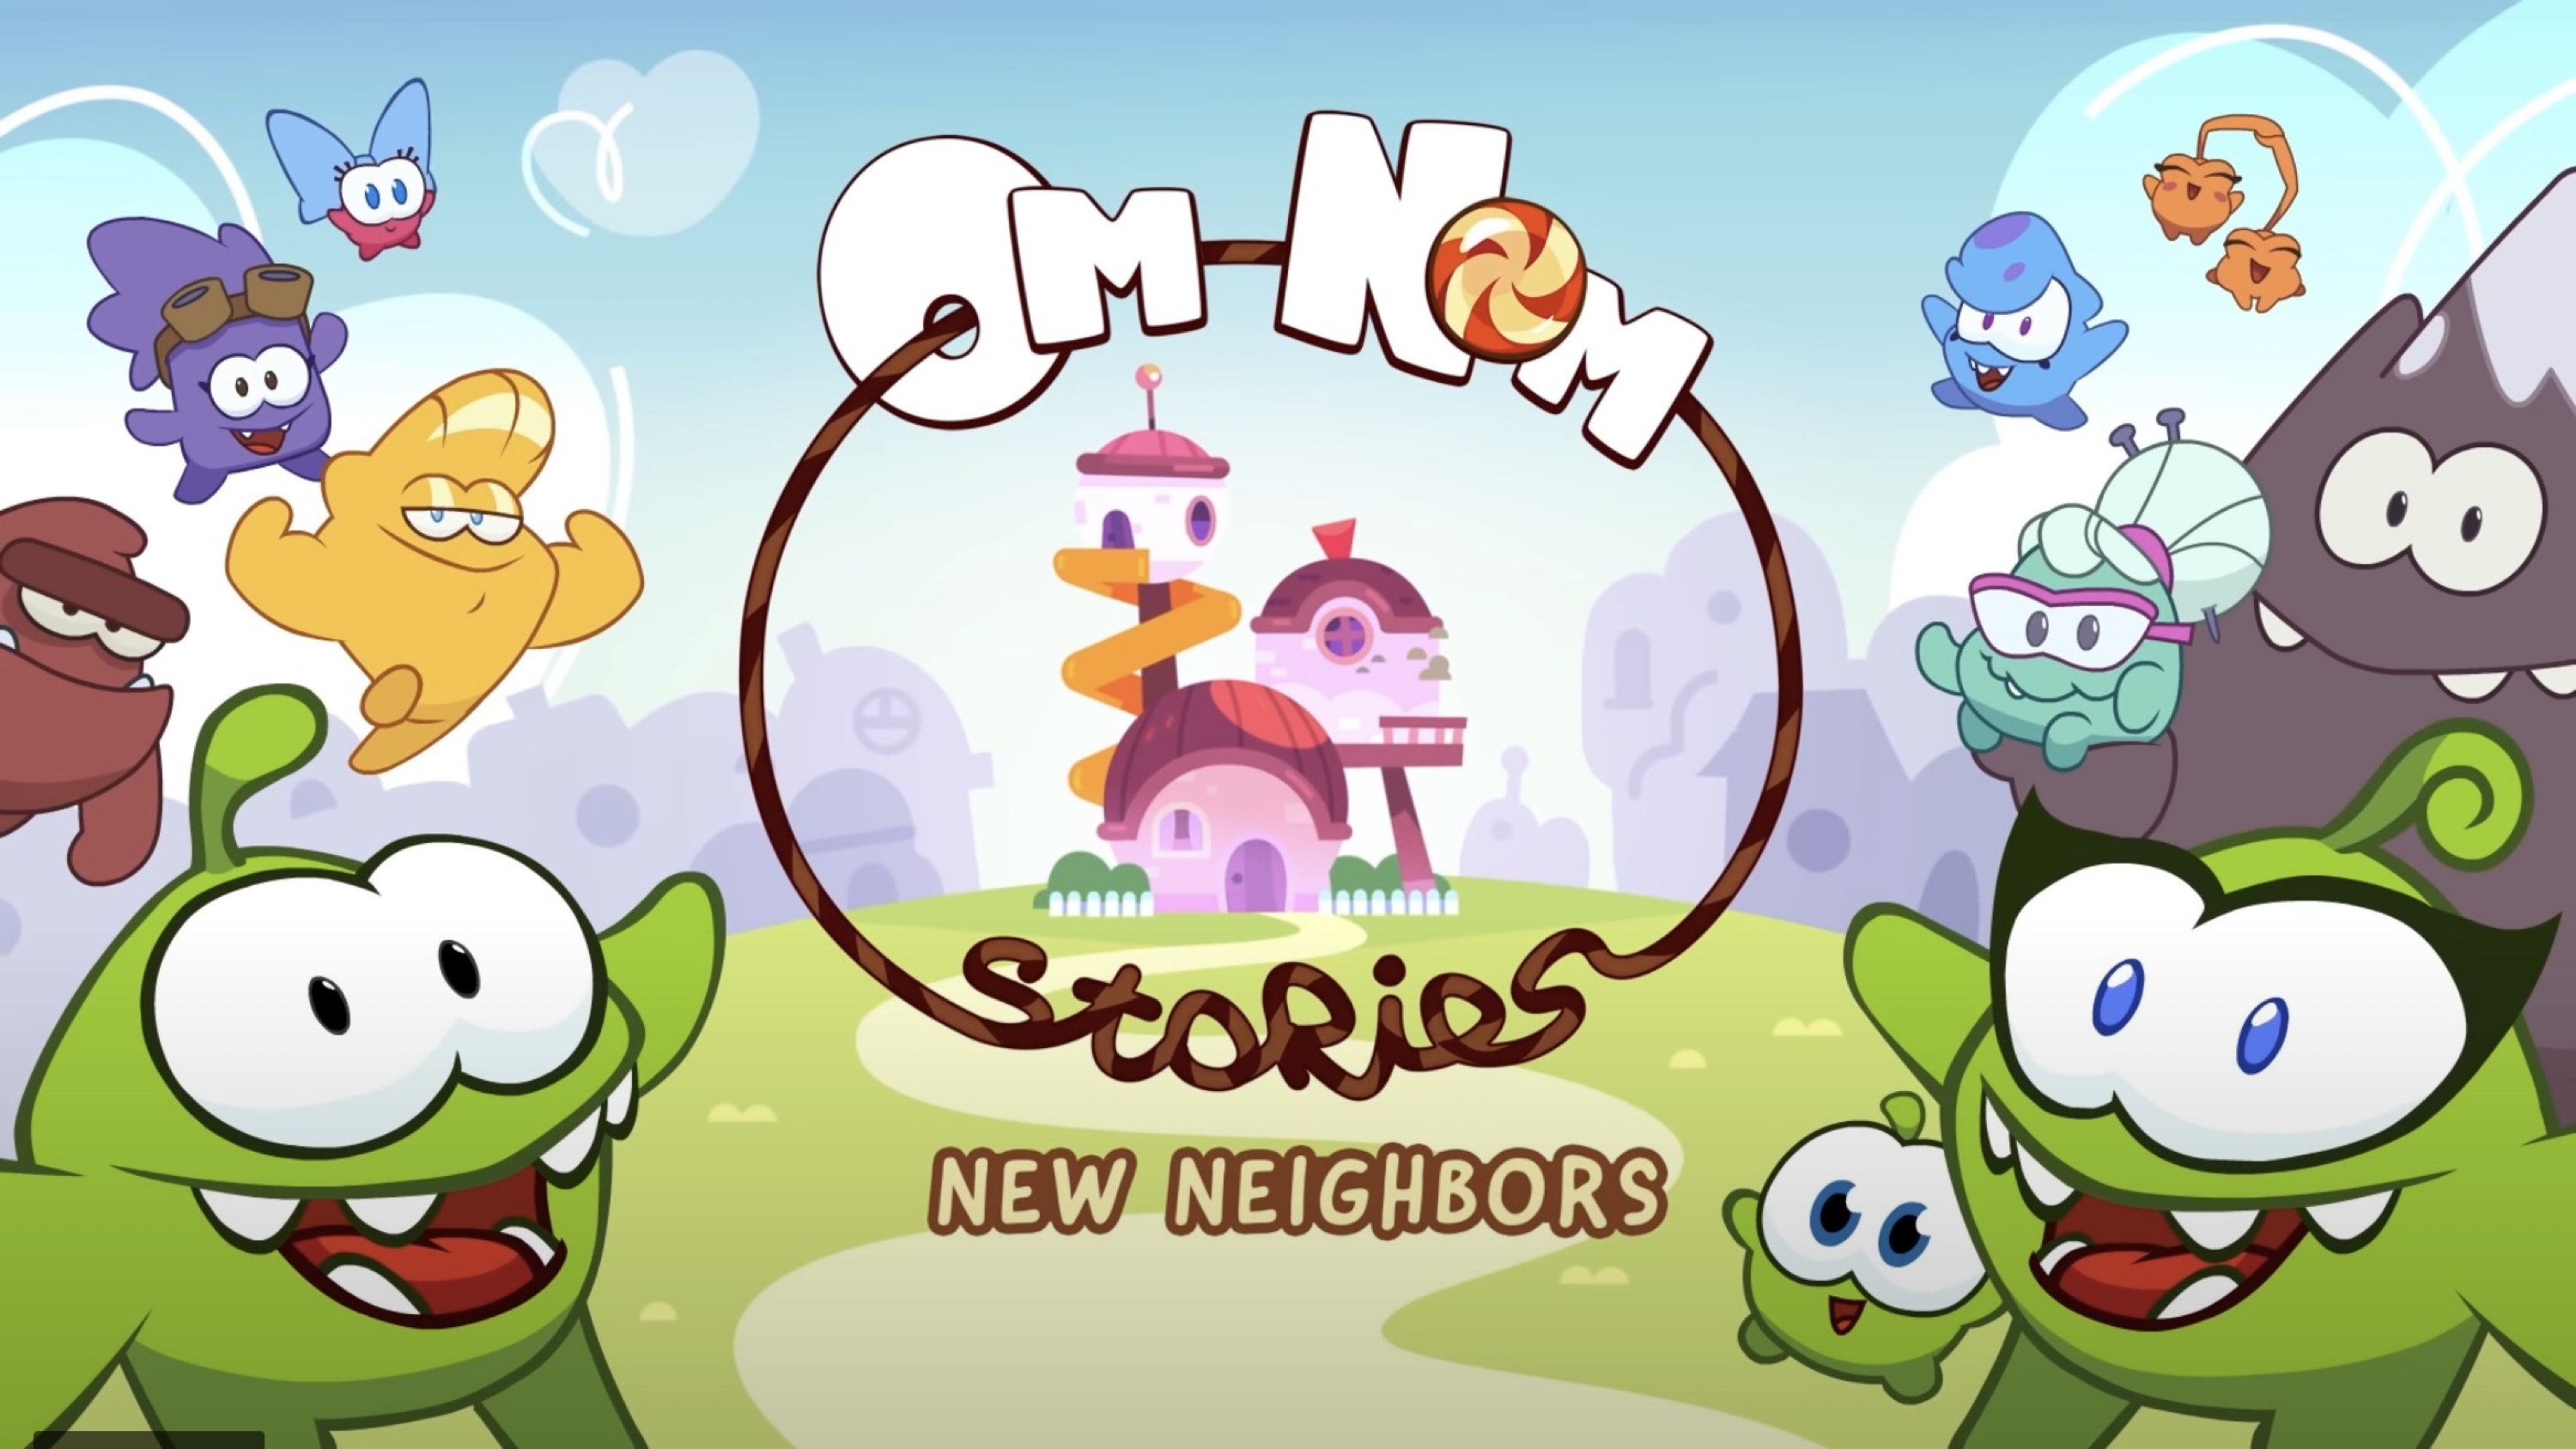 Cut the Rope Magic announced, fifth anniversary celebrated